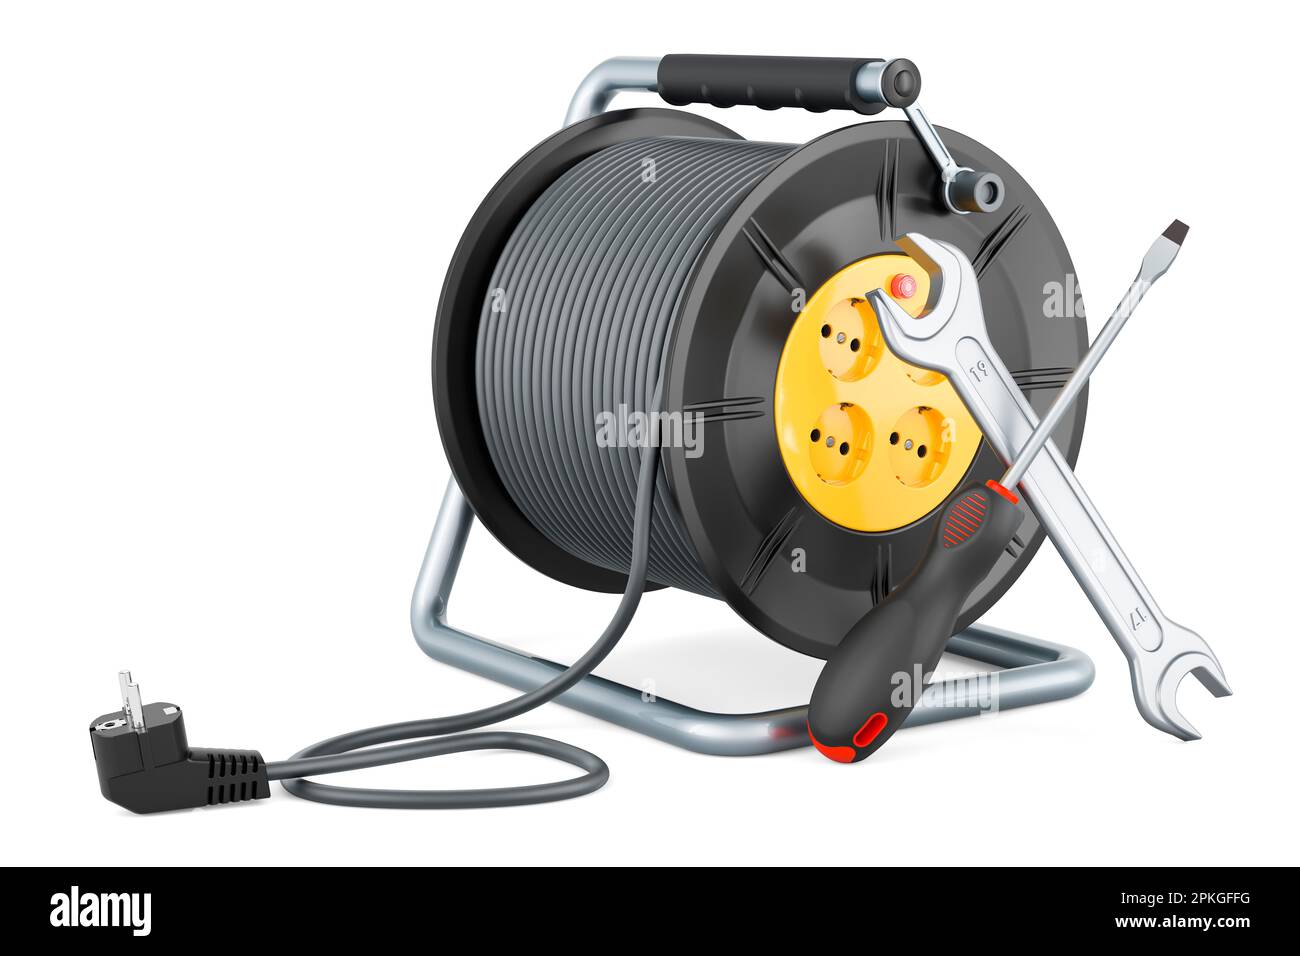 Extension cord reel on white floor indoors, space for text. Electrician's  equipment Stock Photo - Alamy